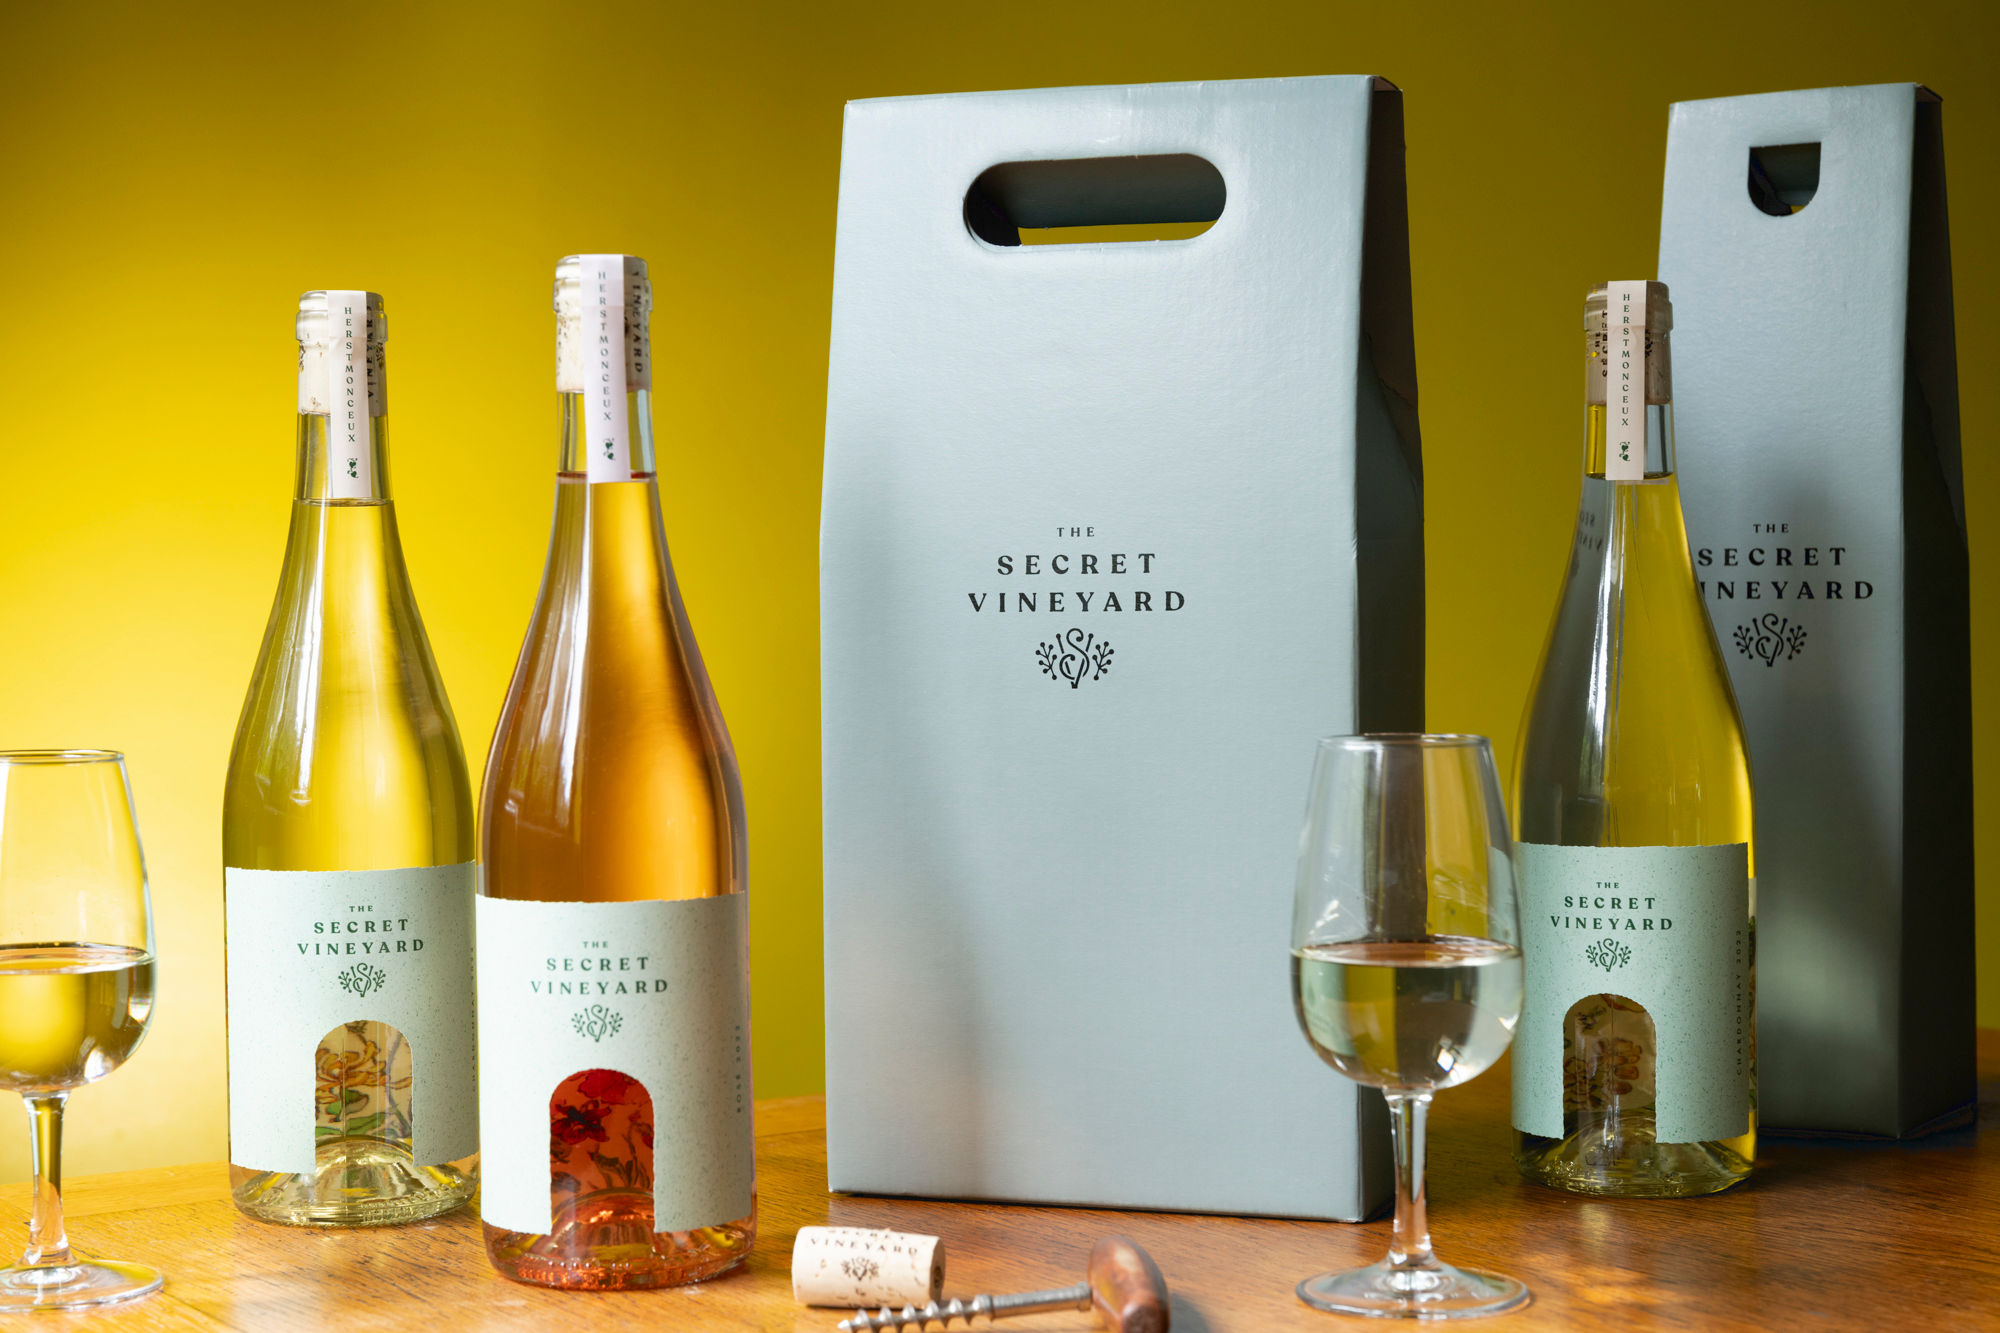 Bottles of wine and packaging photographed against a yellow wall.